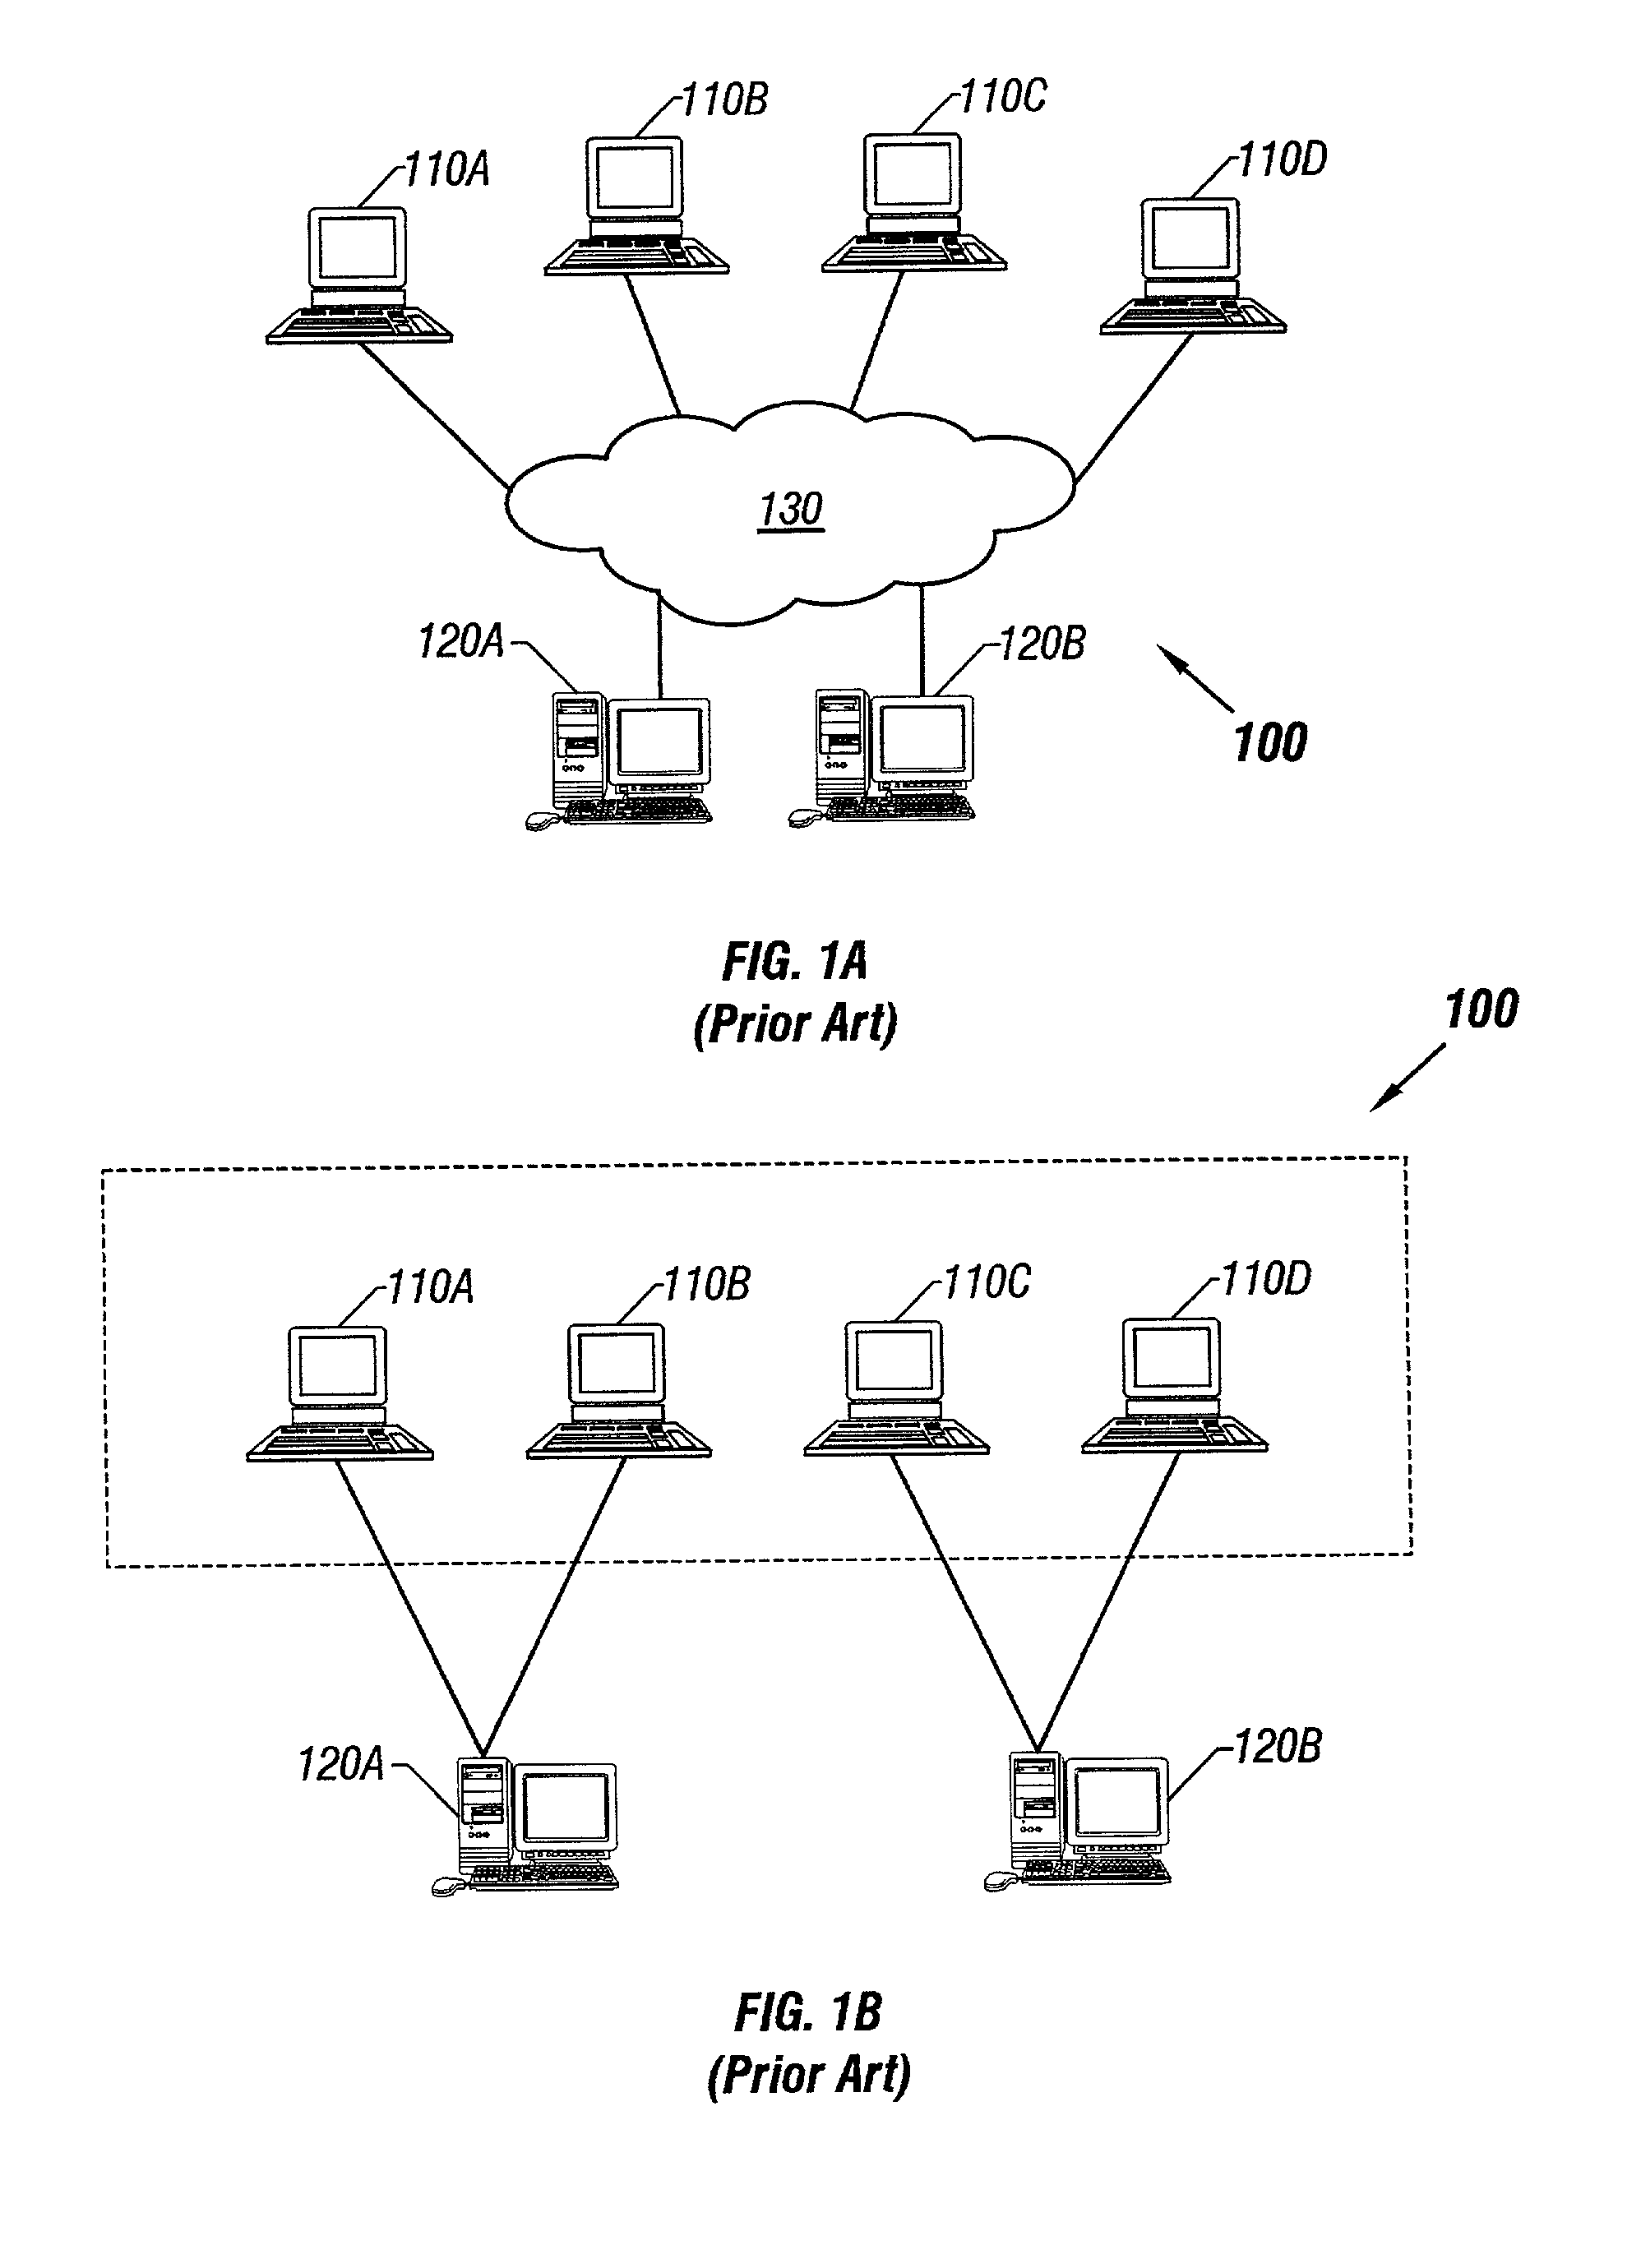 Distributed network system architecture for collaborative computing